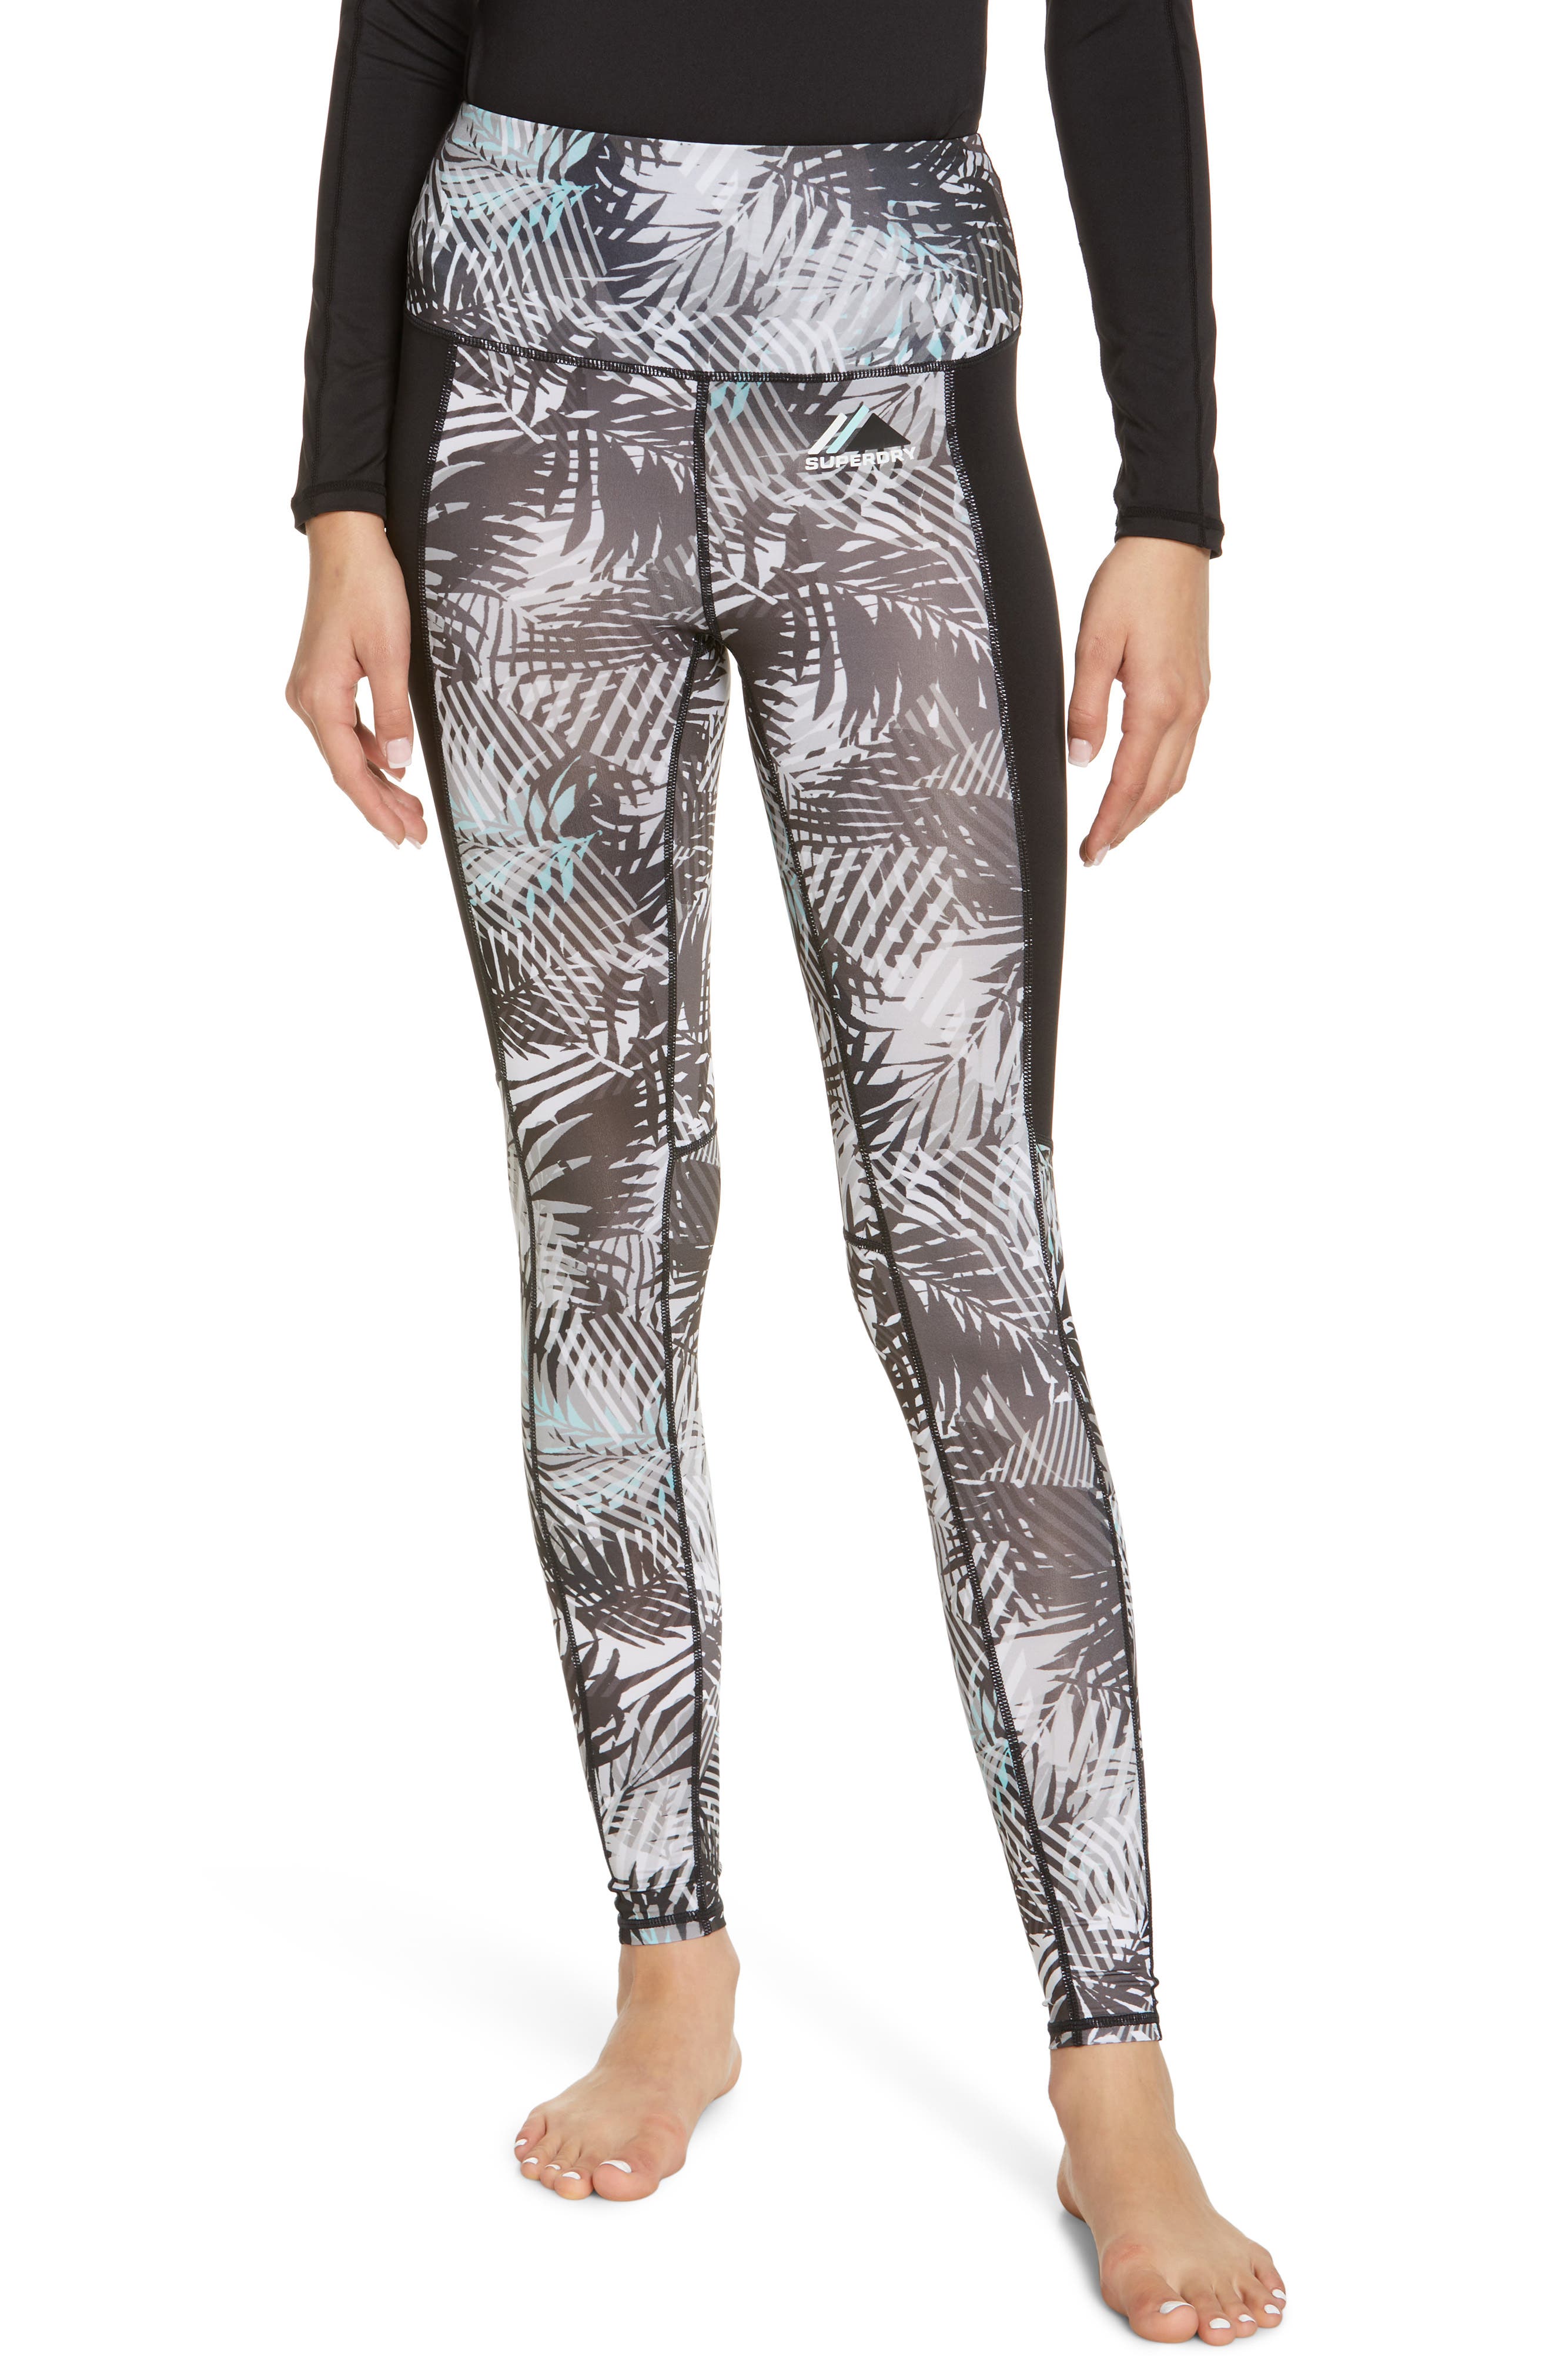 Details about   Superdry Women's Carbon Base Layer Leggings in Snow Spray 